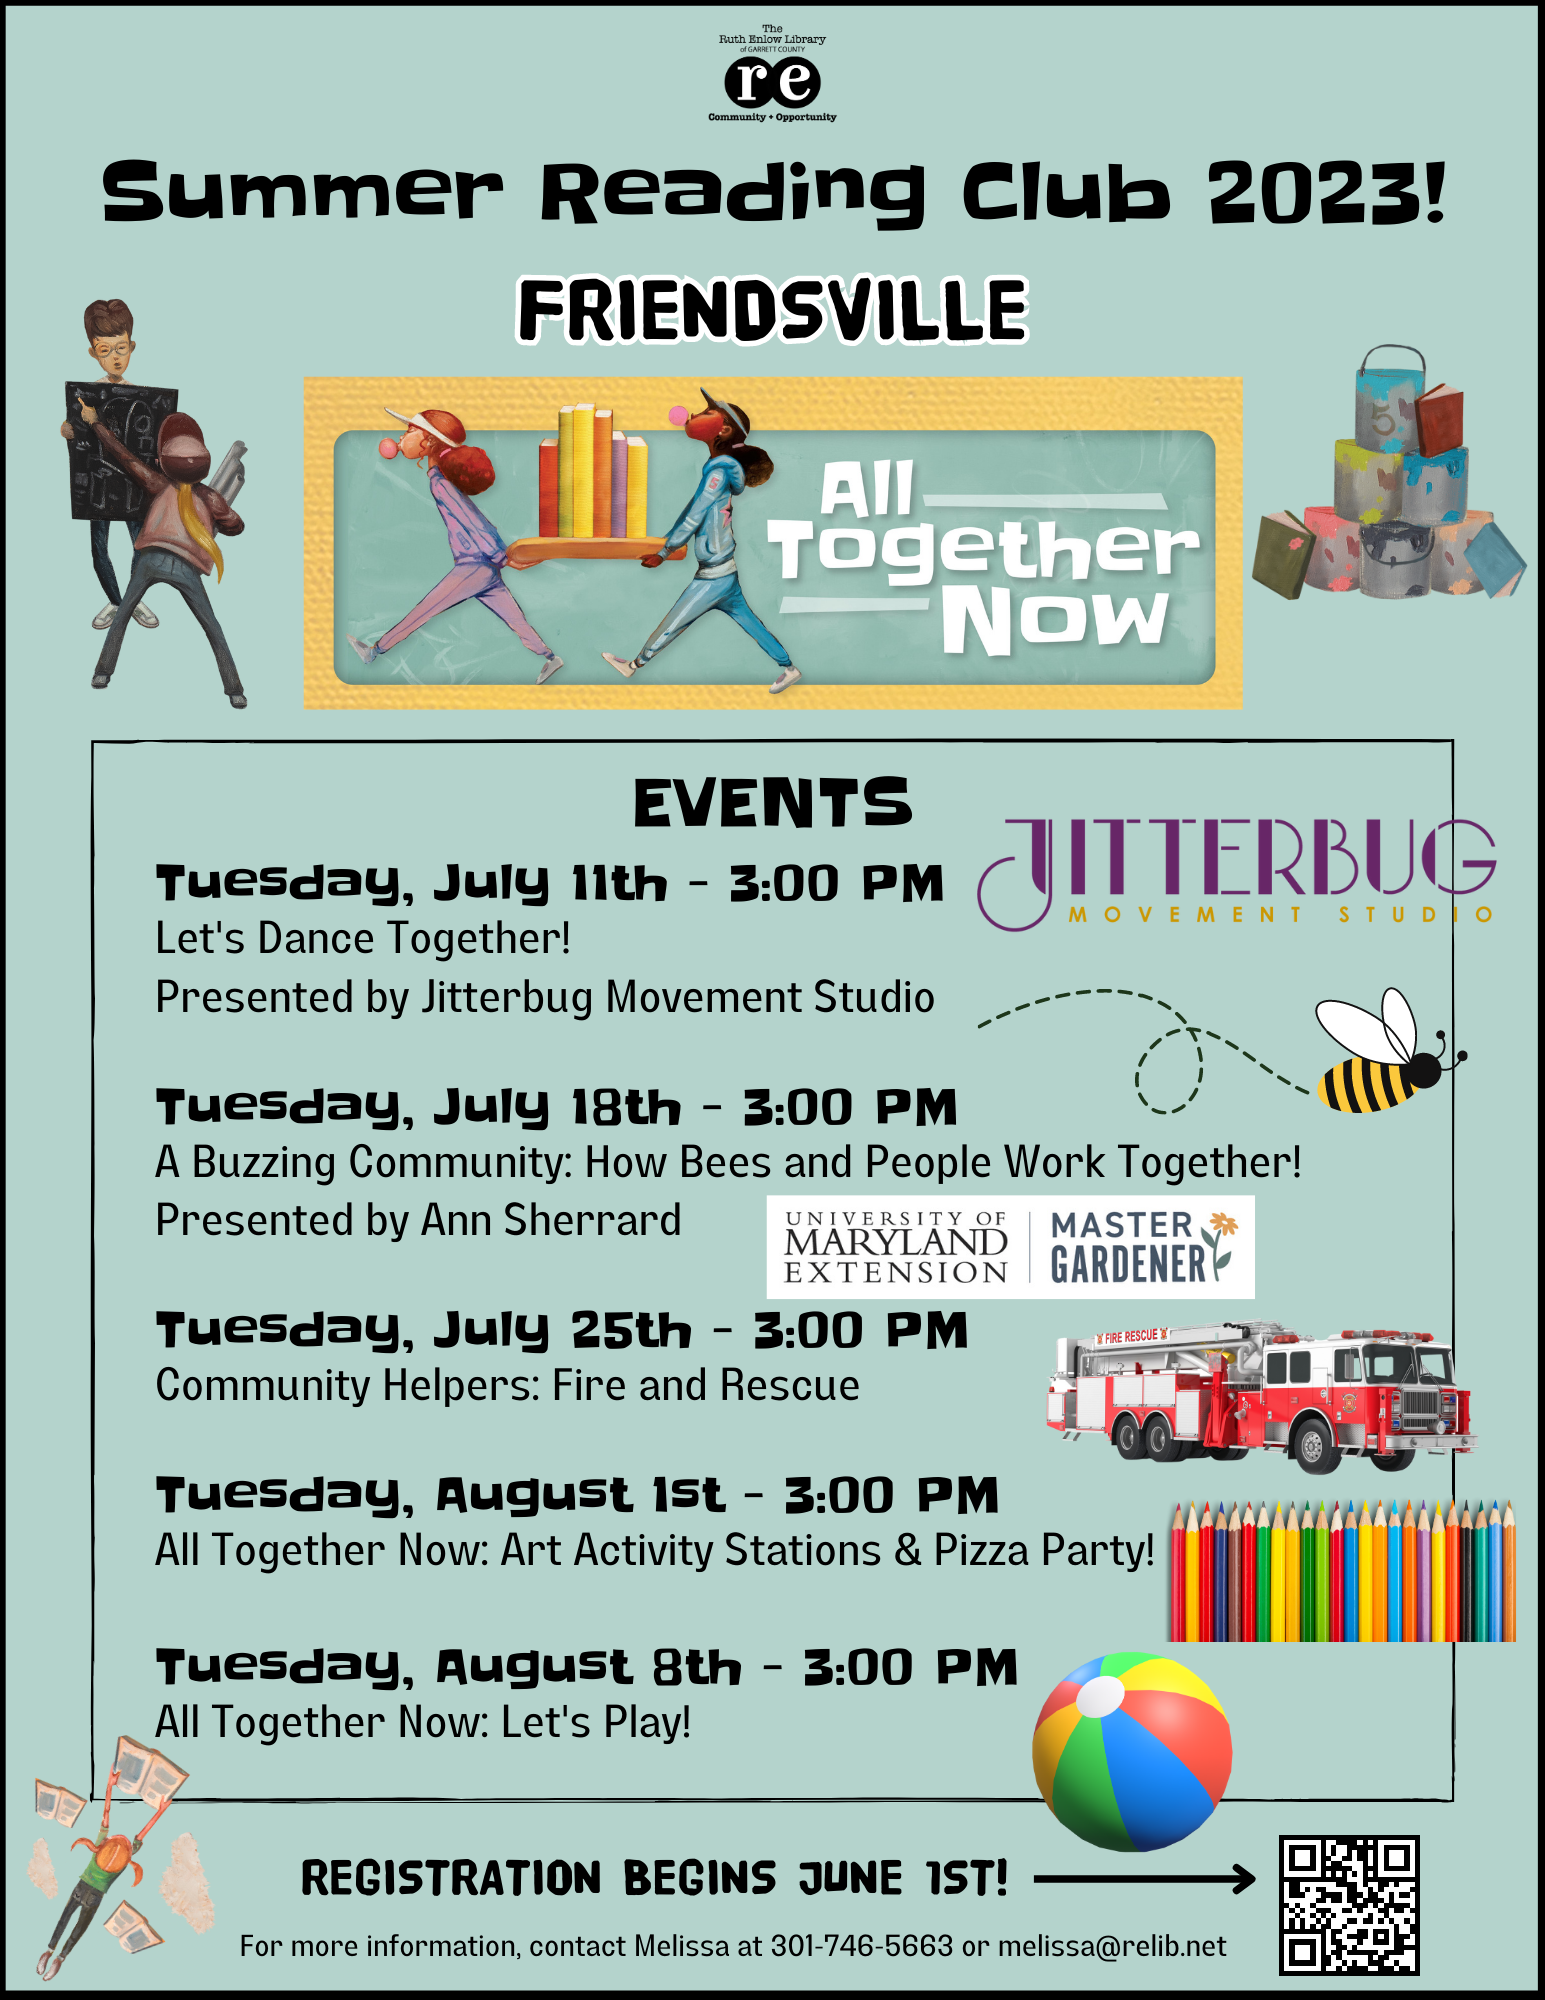 Flyer with Summer Reading Club program listings for Friendsville Library